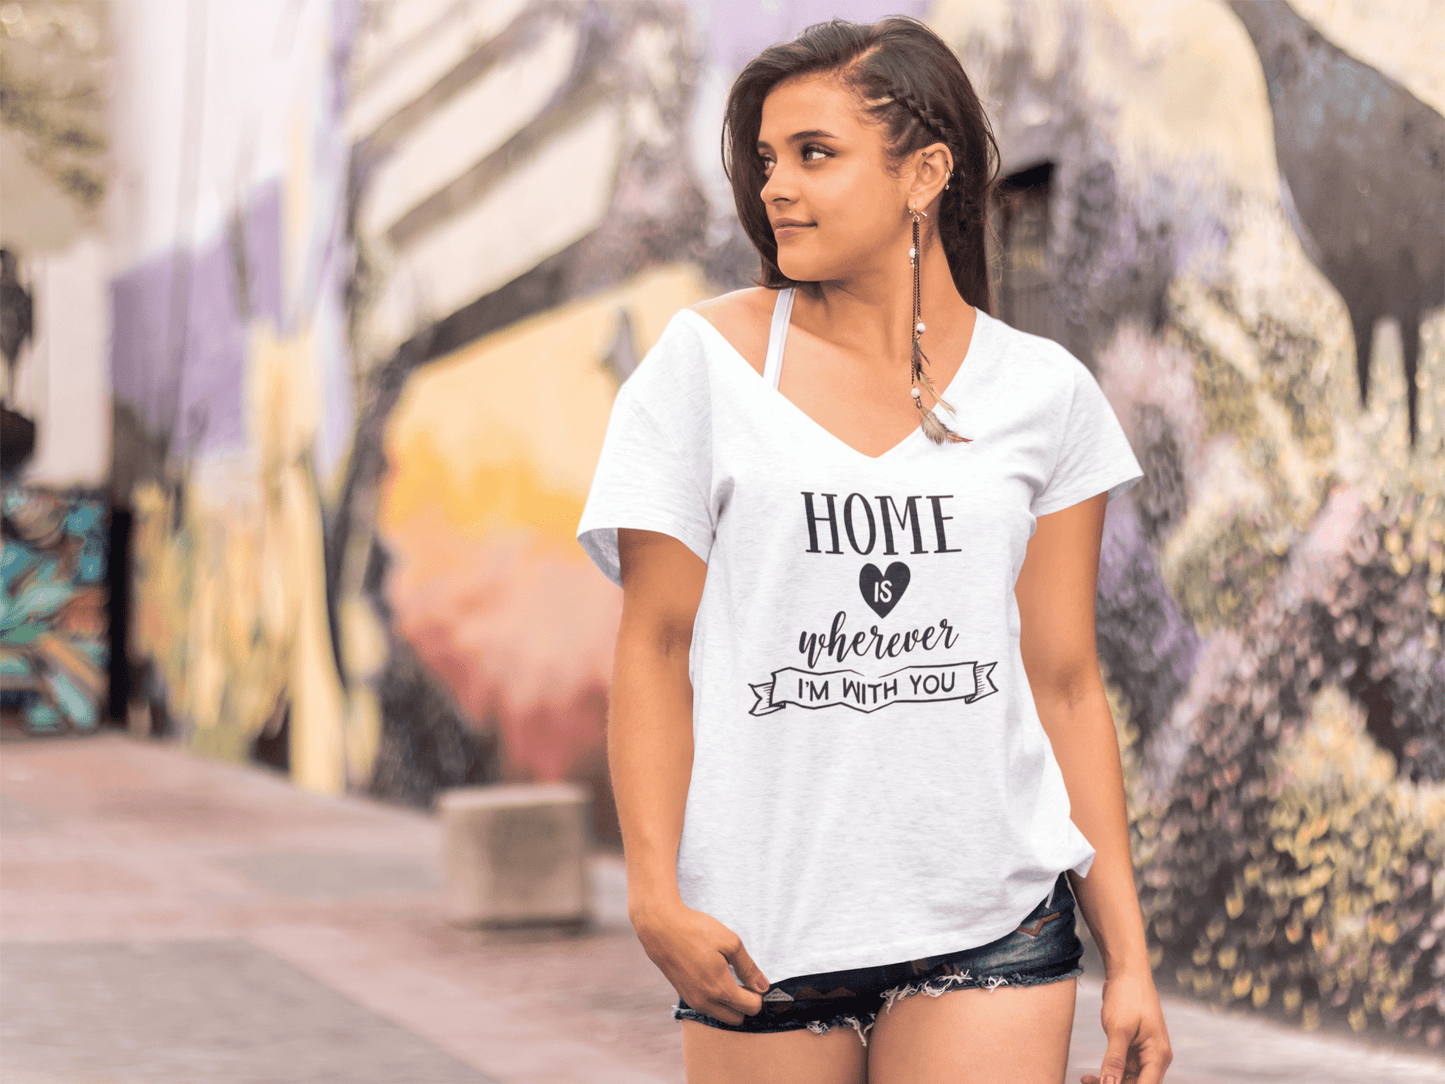 ULTRABASIC Women's T-Shirt Home Is Wherever I'm With You - Short Sleeve Tee Shirt Gift Tops